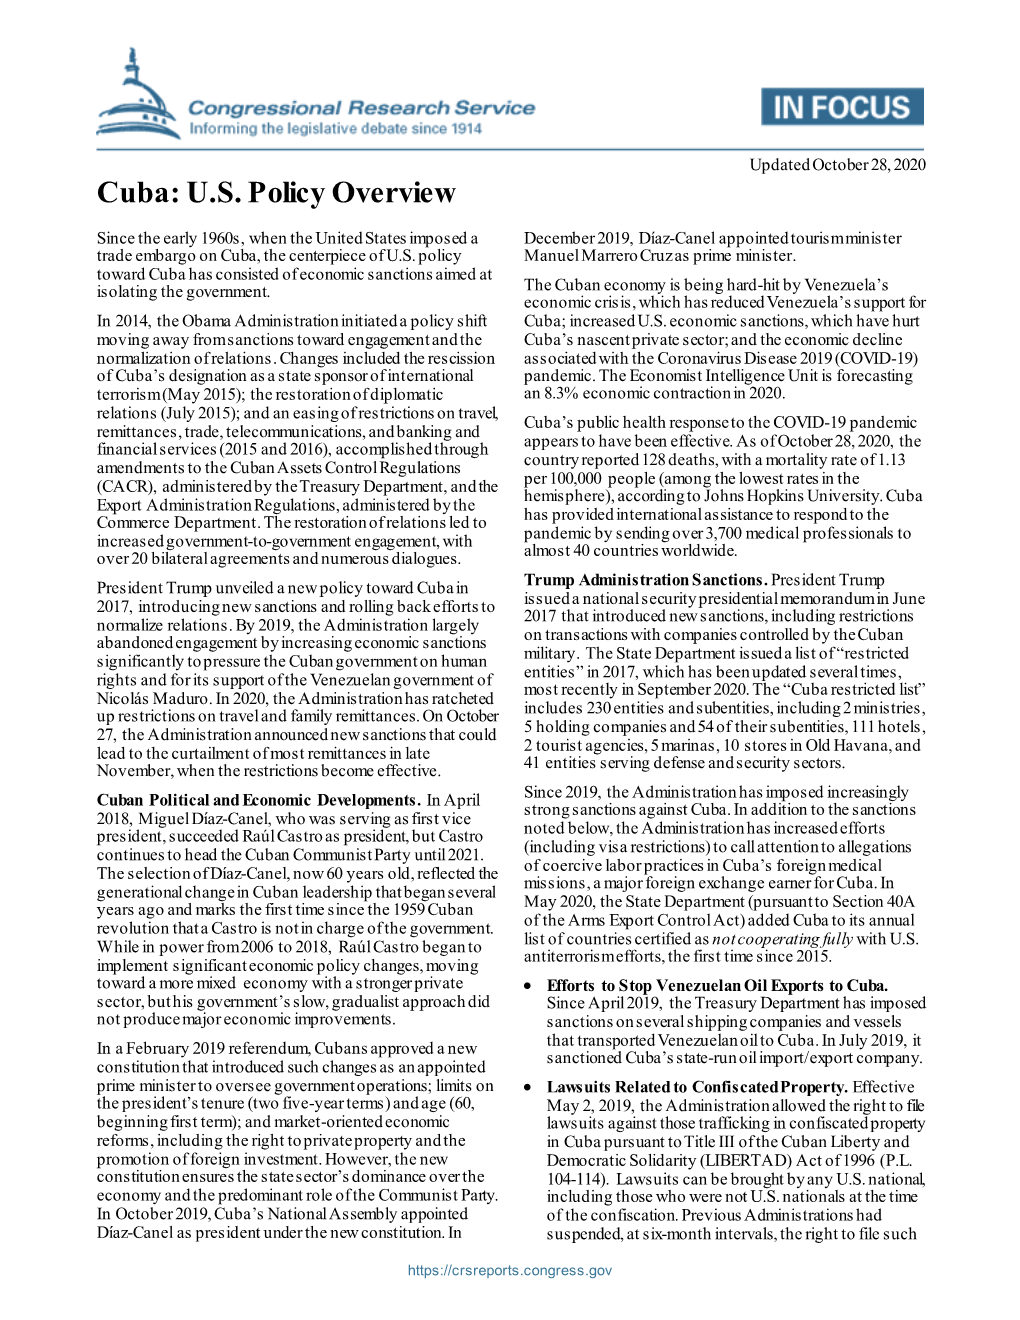 Cuba: U.S. Policy Overview